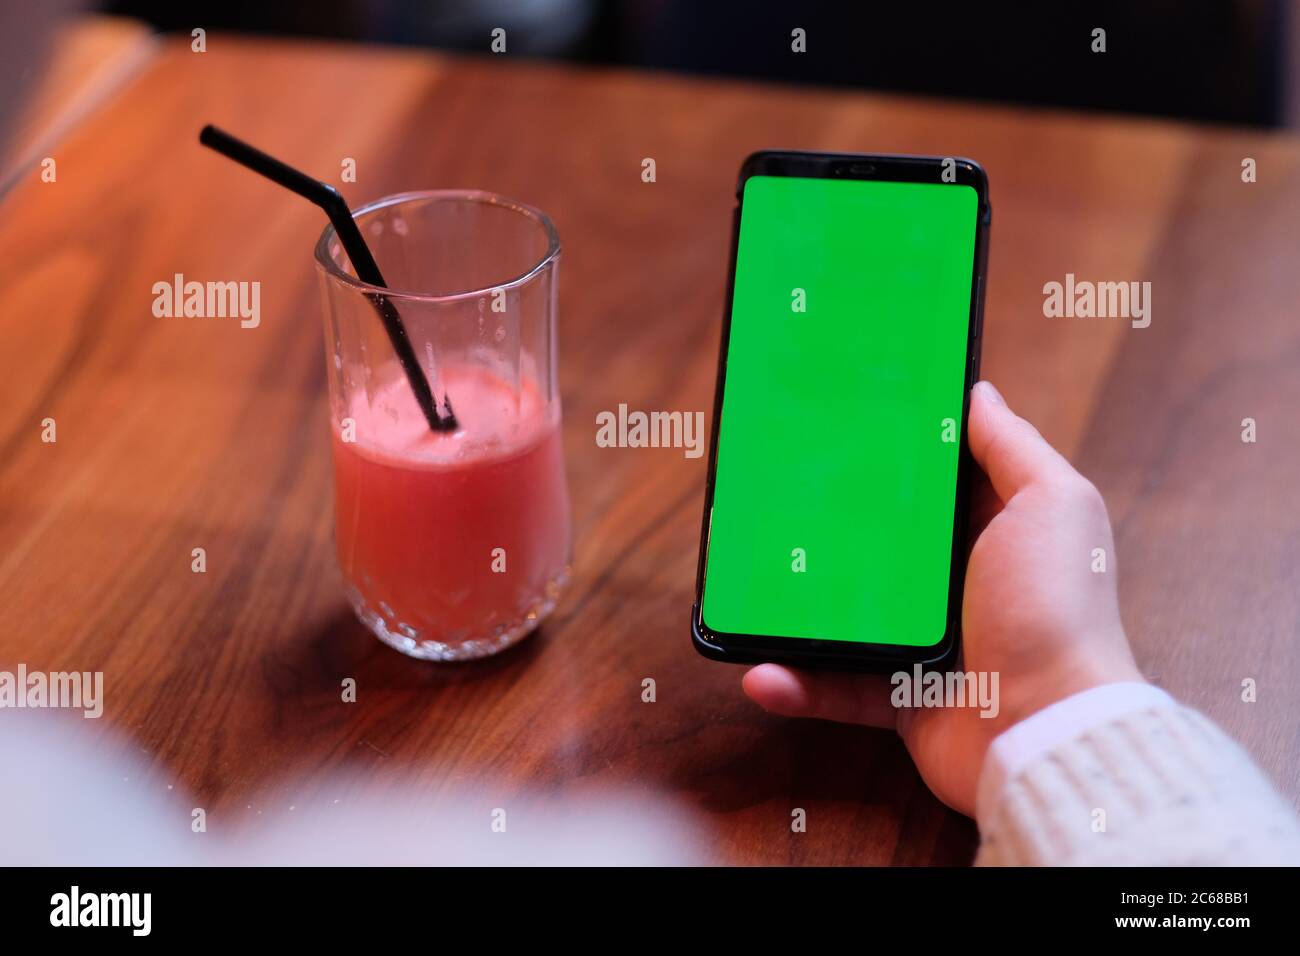 over shoulder of man holding green screen phone with a glass of fruit juice on wooden table. Blur background Stock Photo